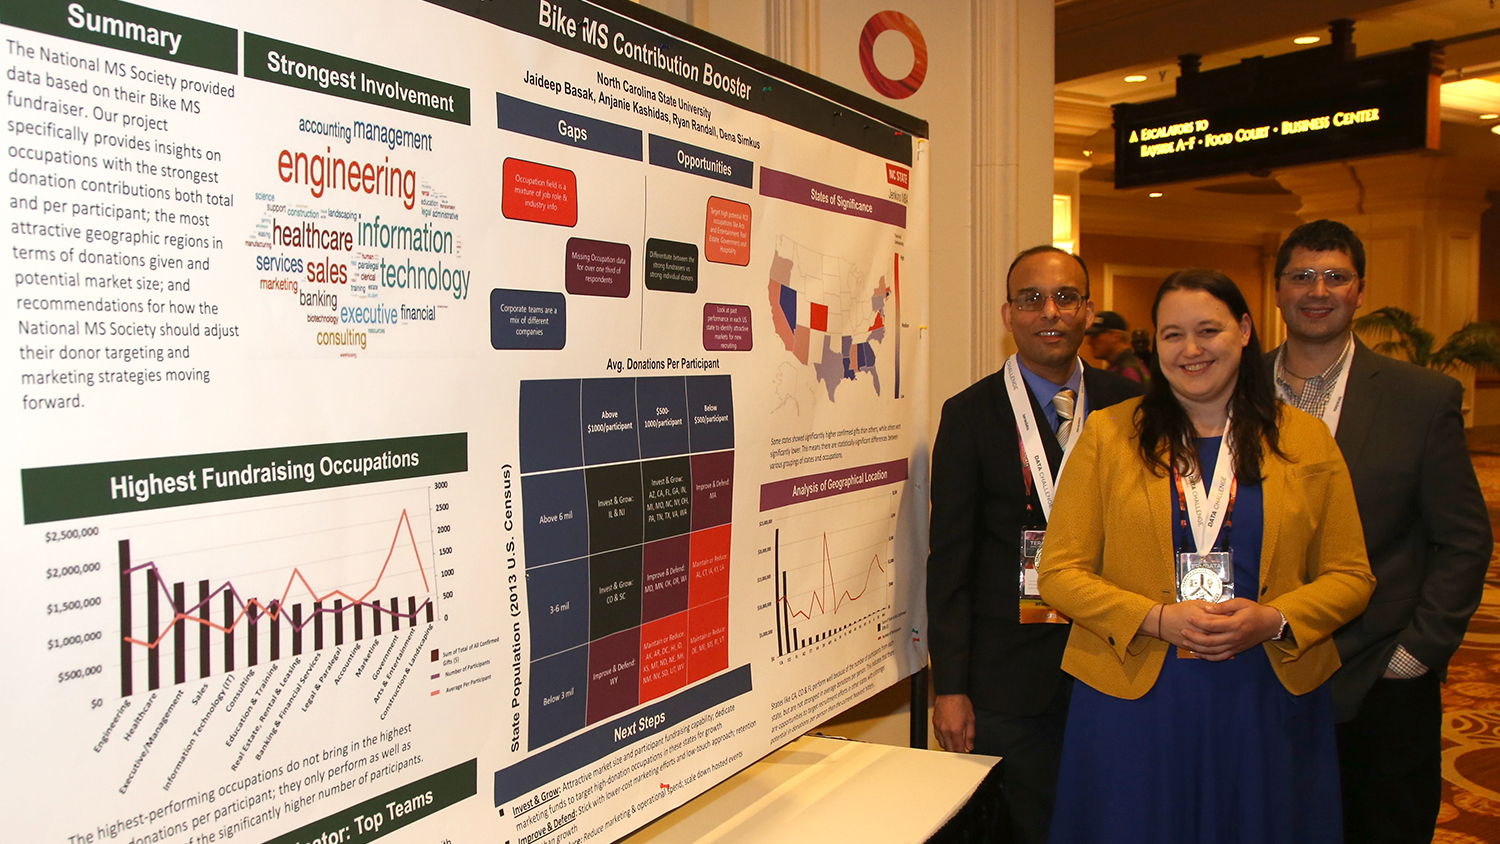 NC Jenkins MBA TUN team members Jaideep Basak, Dena Simkus and Ryan Randall, with their poster at the TUN 2018 Data Challenge conference. Anjanie Kashidas did not attend the conference. - Photo credit: TUN